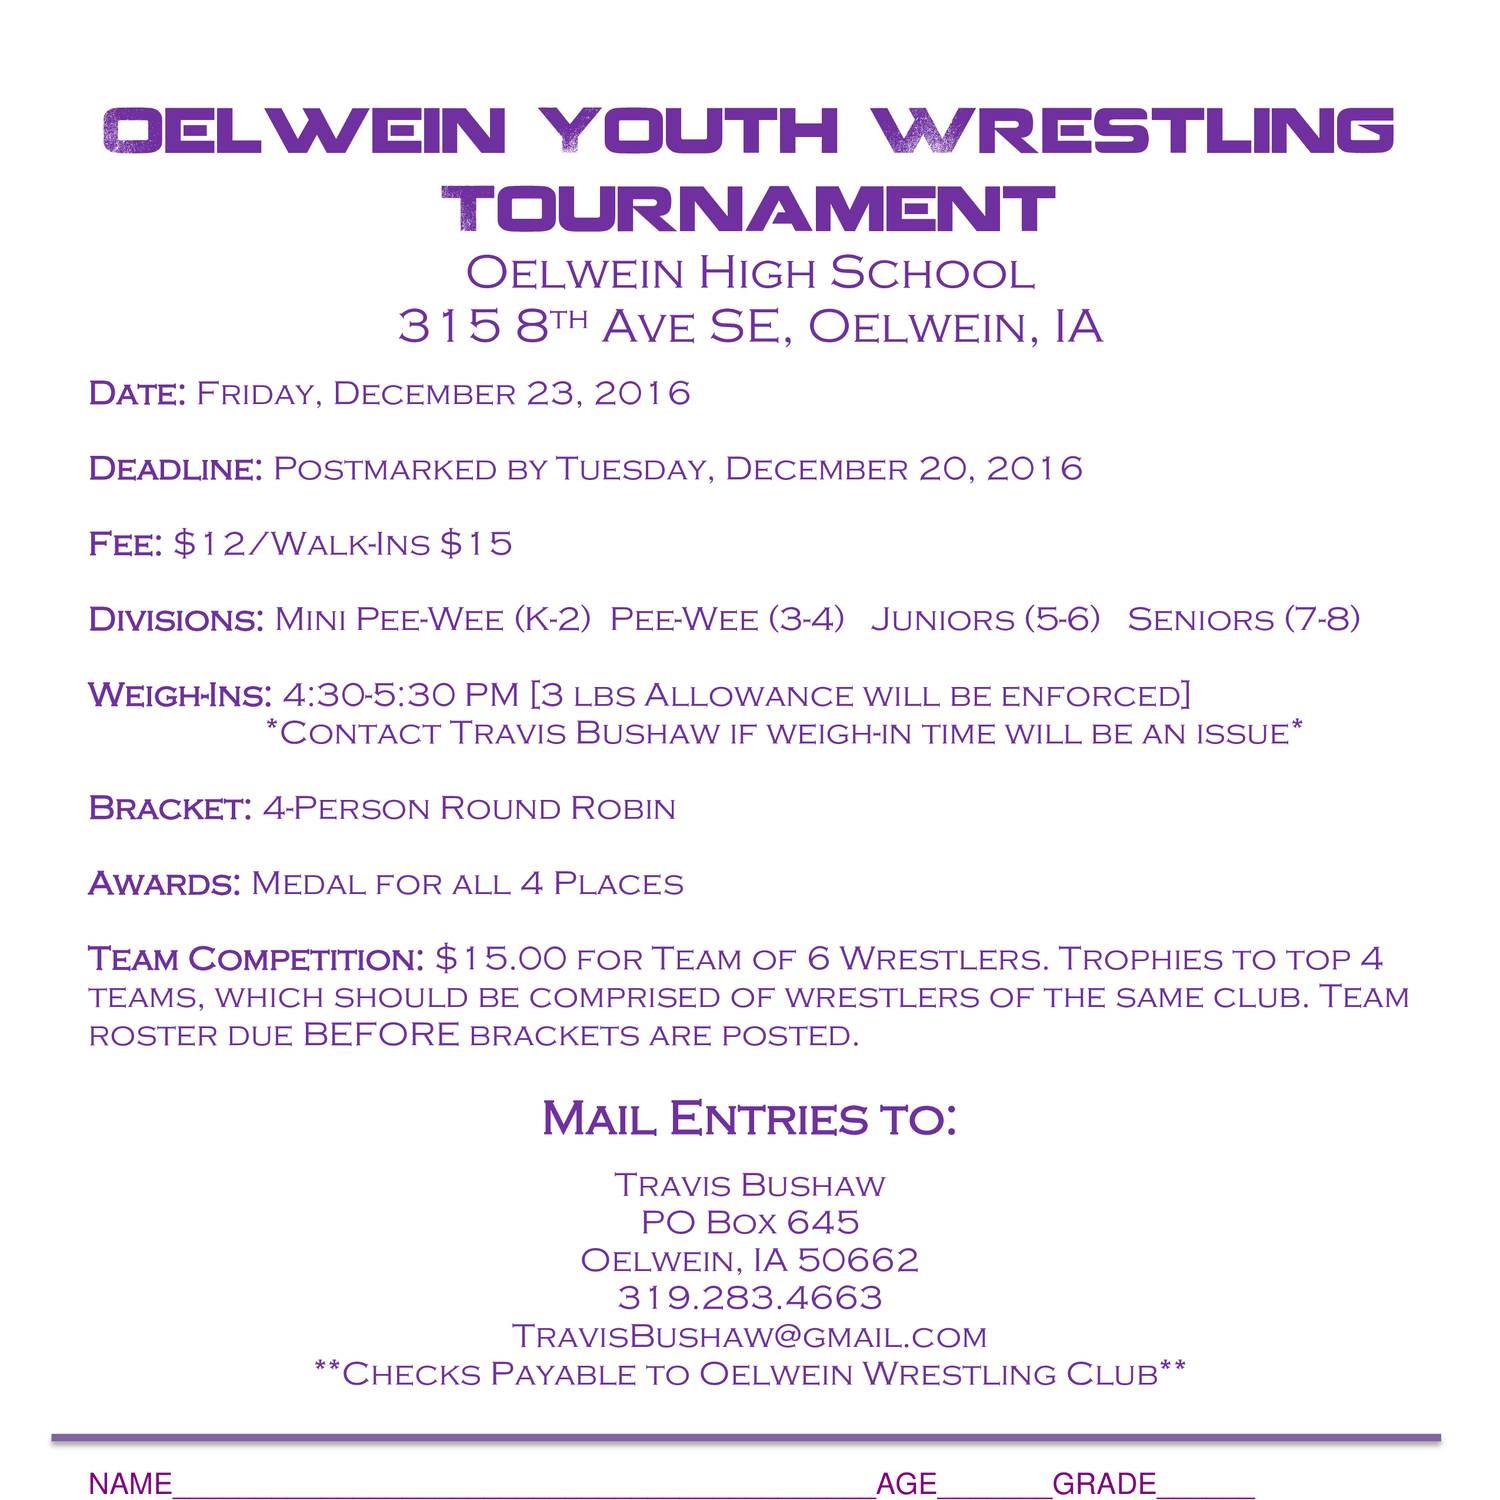 Oelwein Youth Wrestling Tournament Flyer 12.23.16.pdf DocDroid